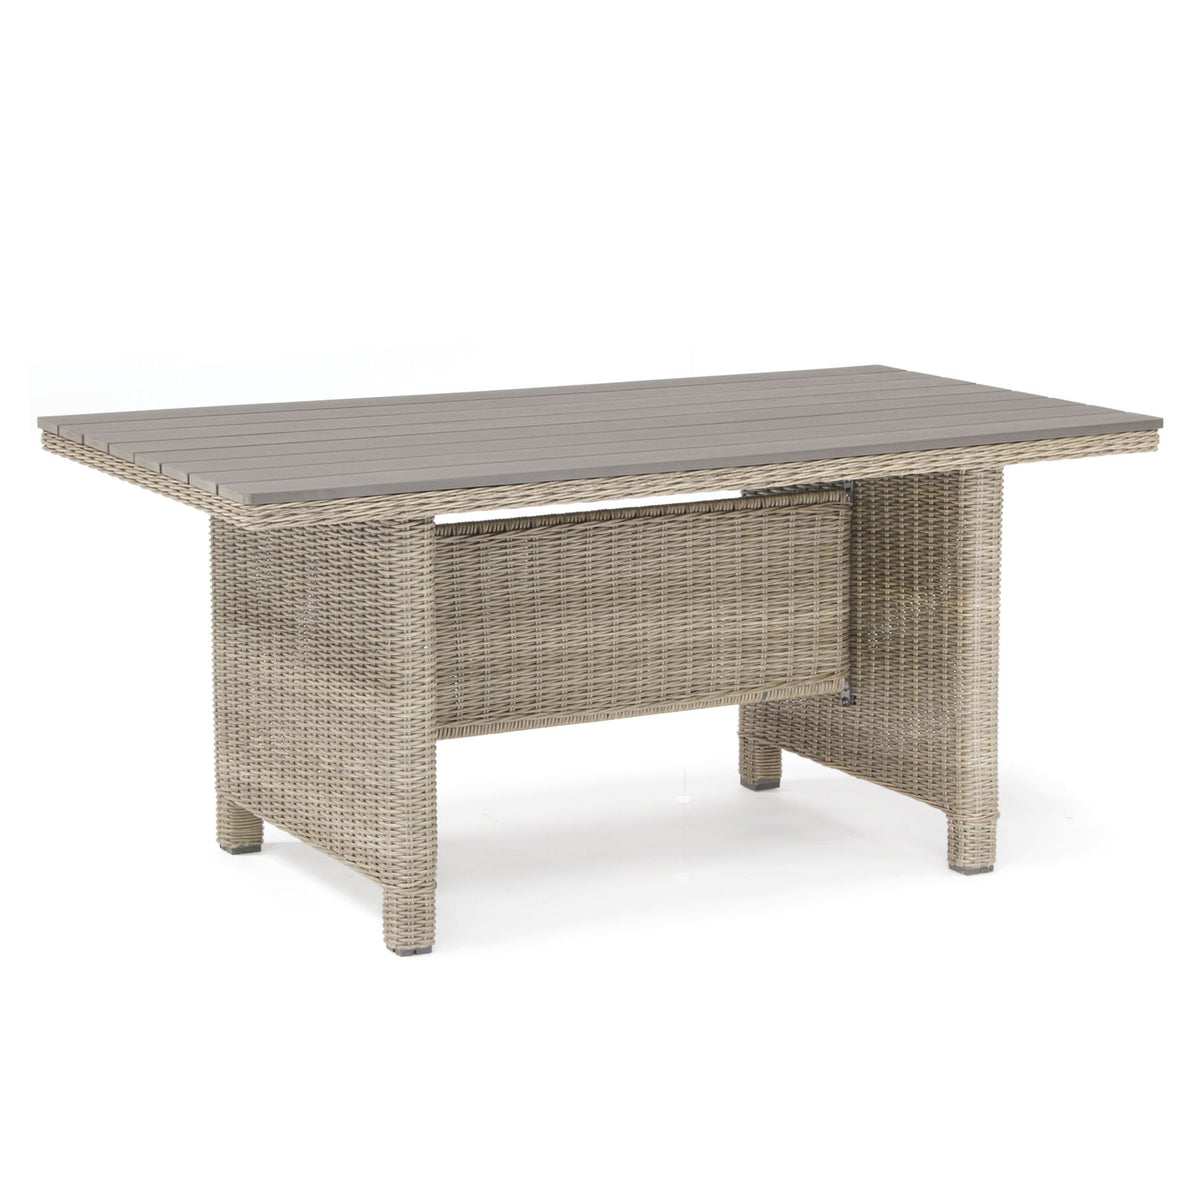 Kettler Palma Oyster Wicker Casual Dining Slat Top Table